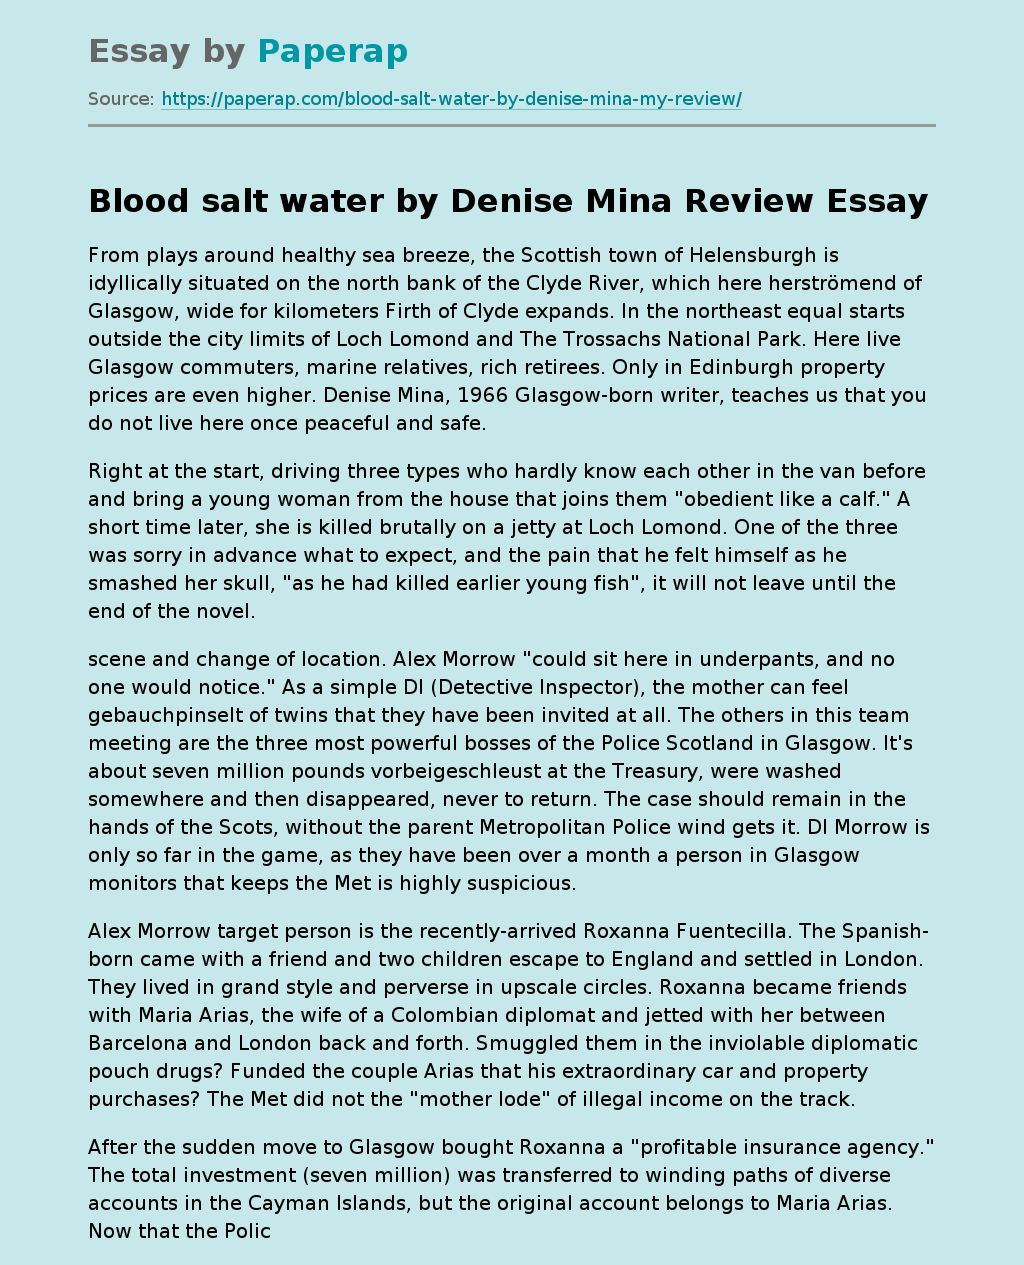 Blood salt water by Denise Mina Review